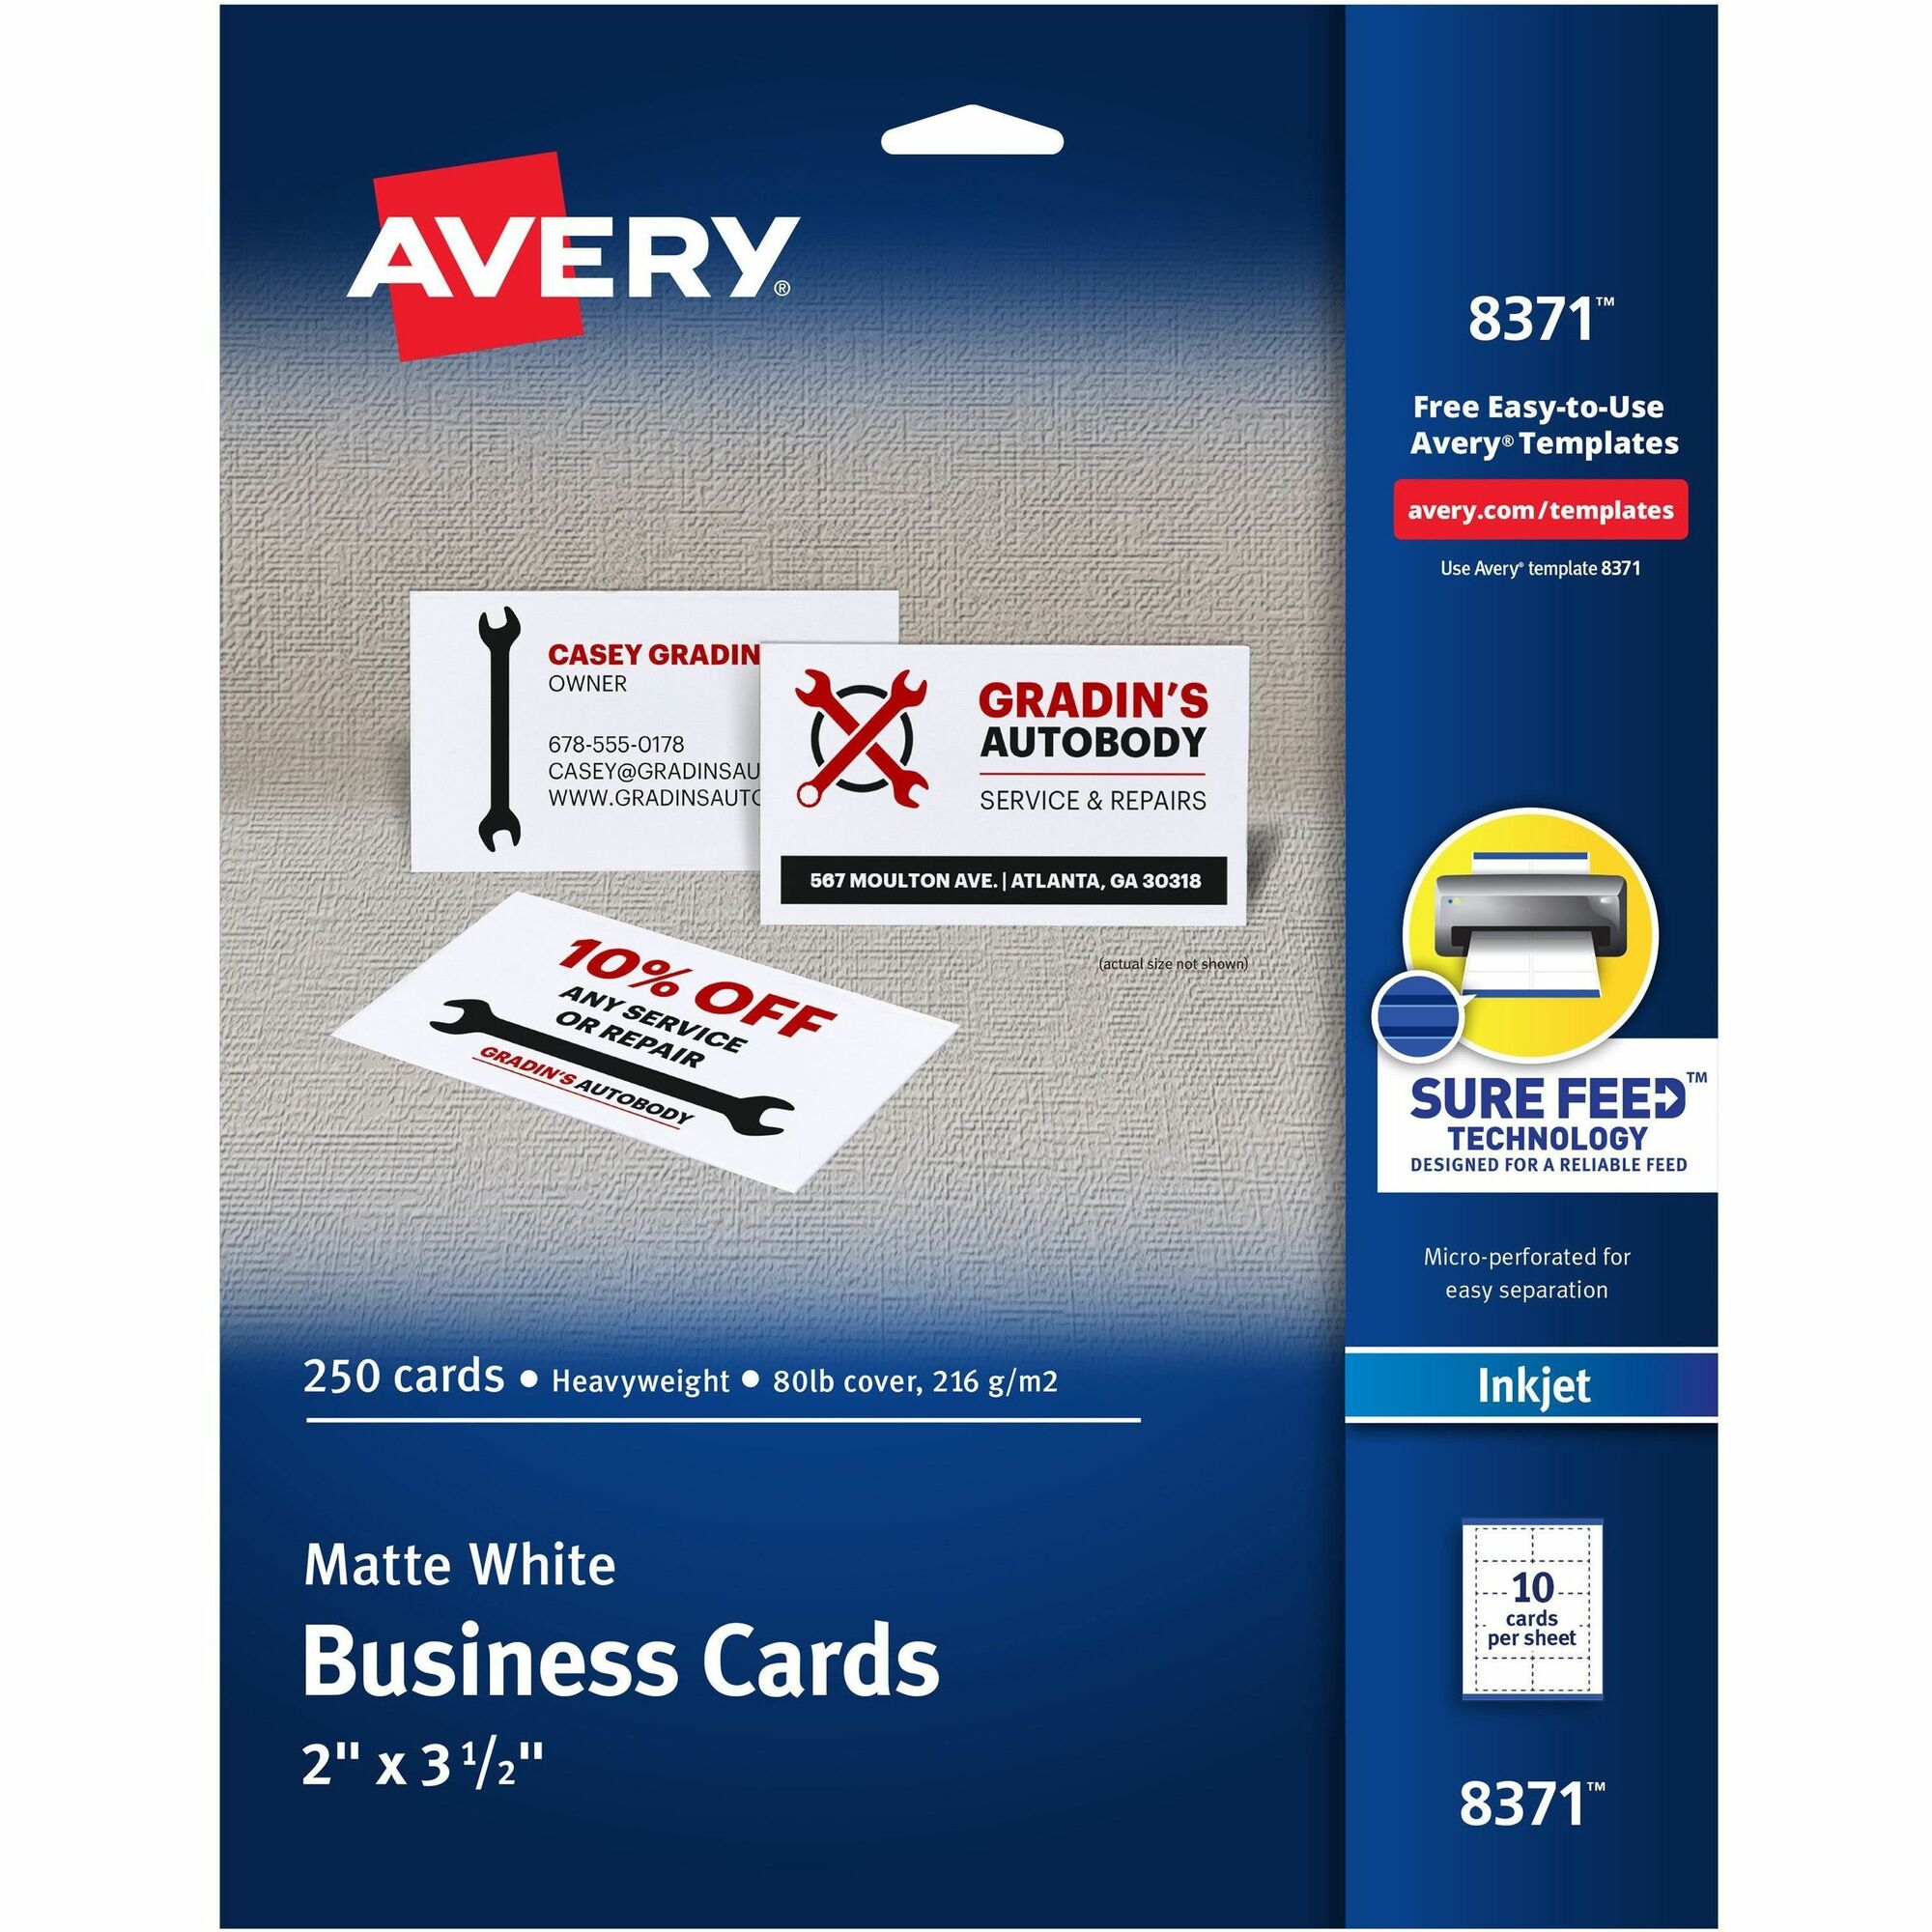 amazing-avery-business-card-templates-8371